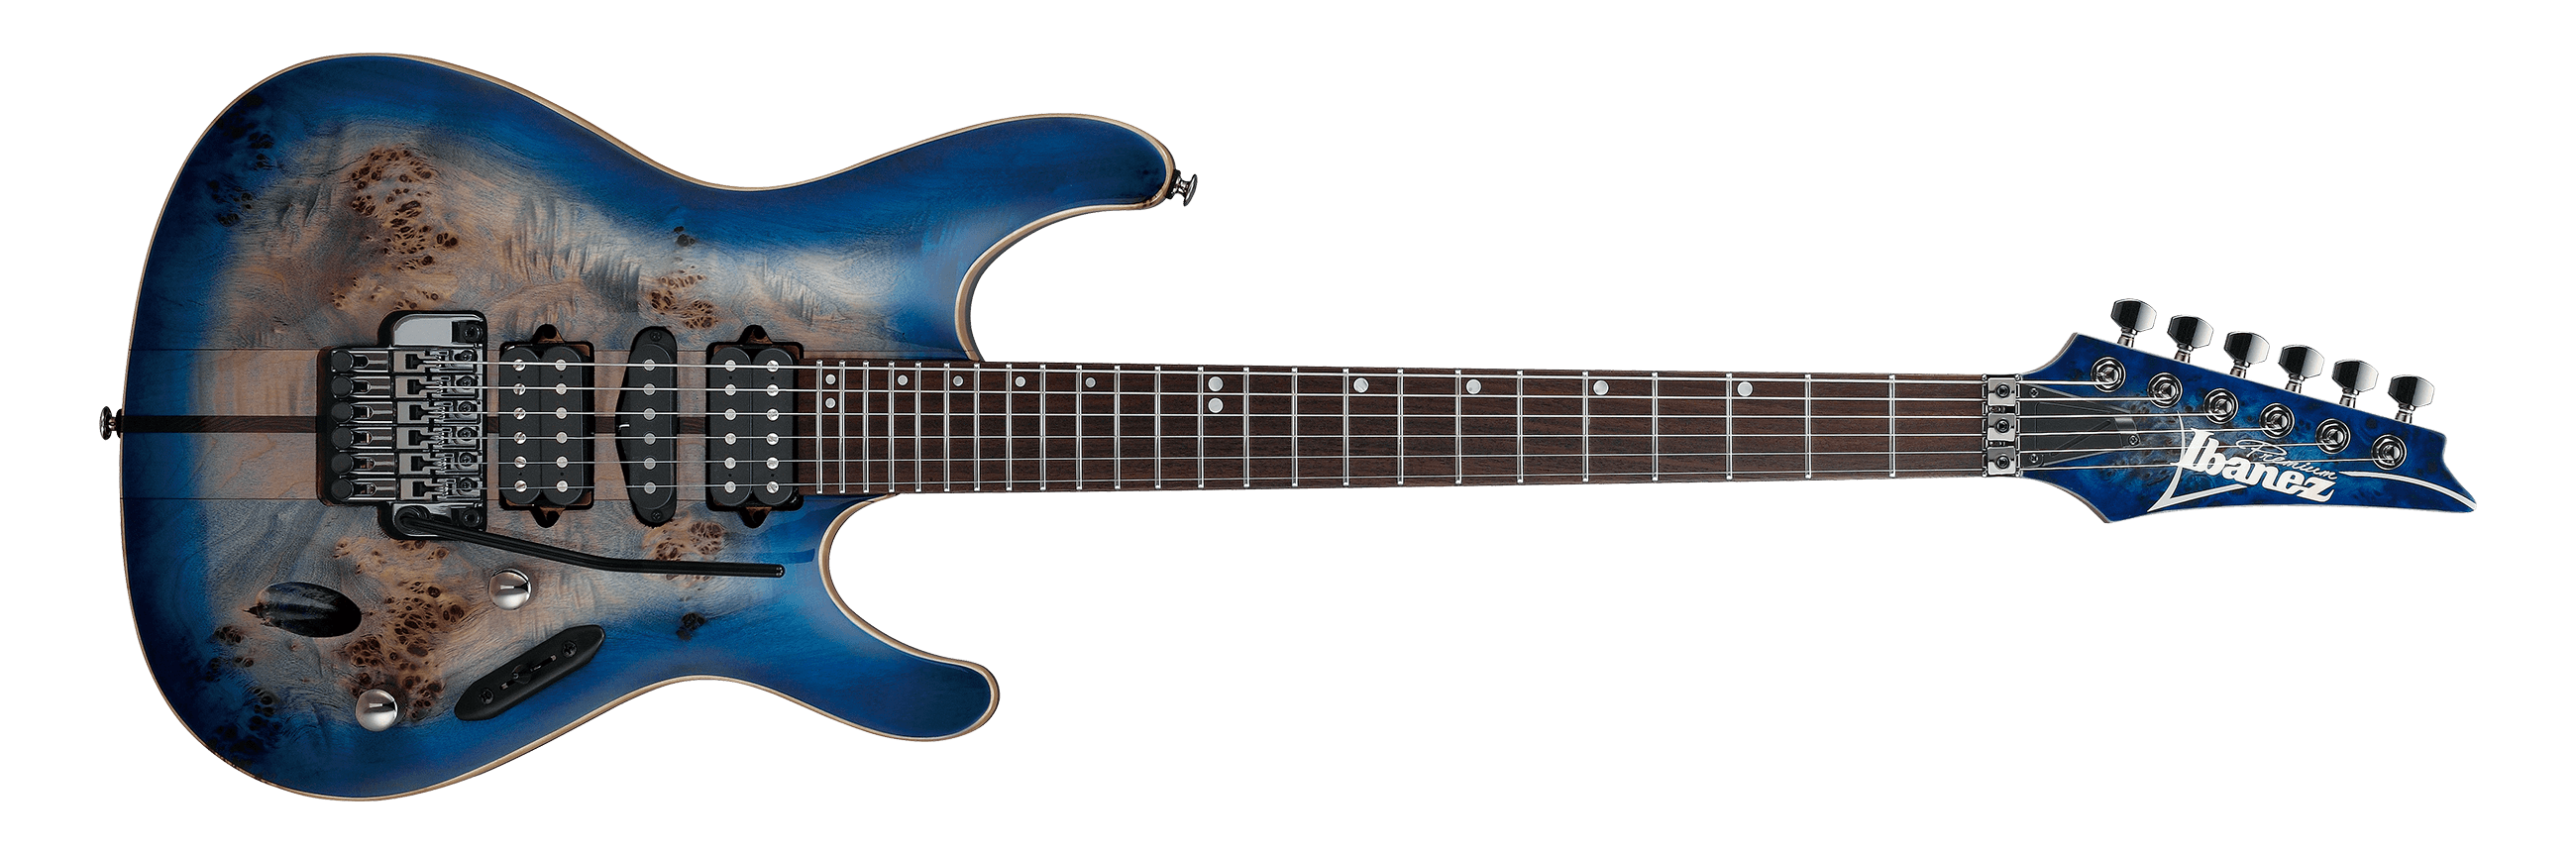 S1070PBZ | S | ELECTRIC GUITARS | PRODUCTS | Ibanez guitars